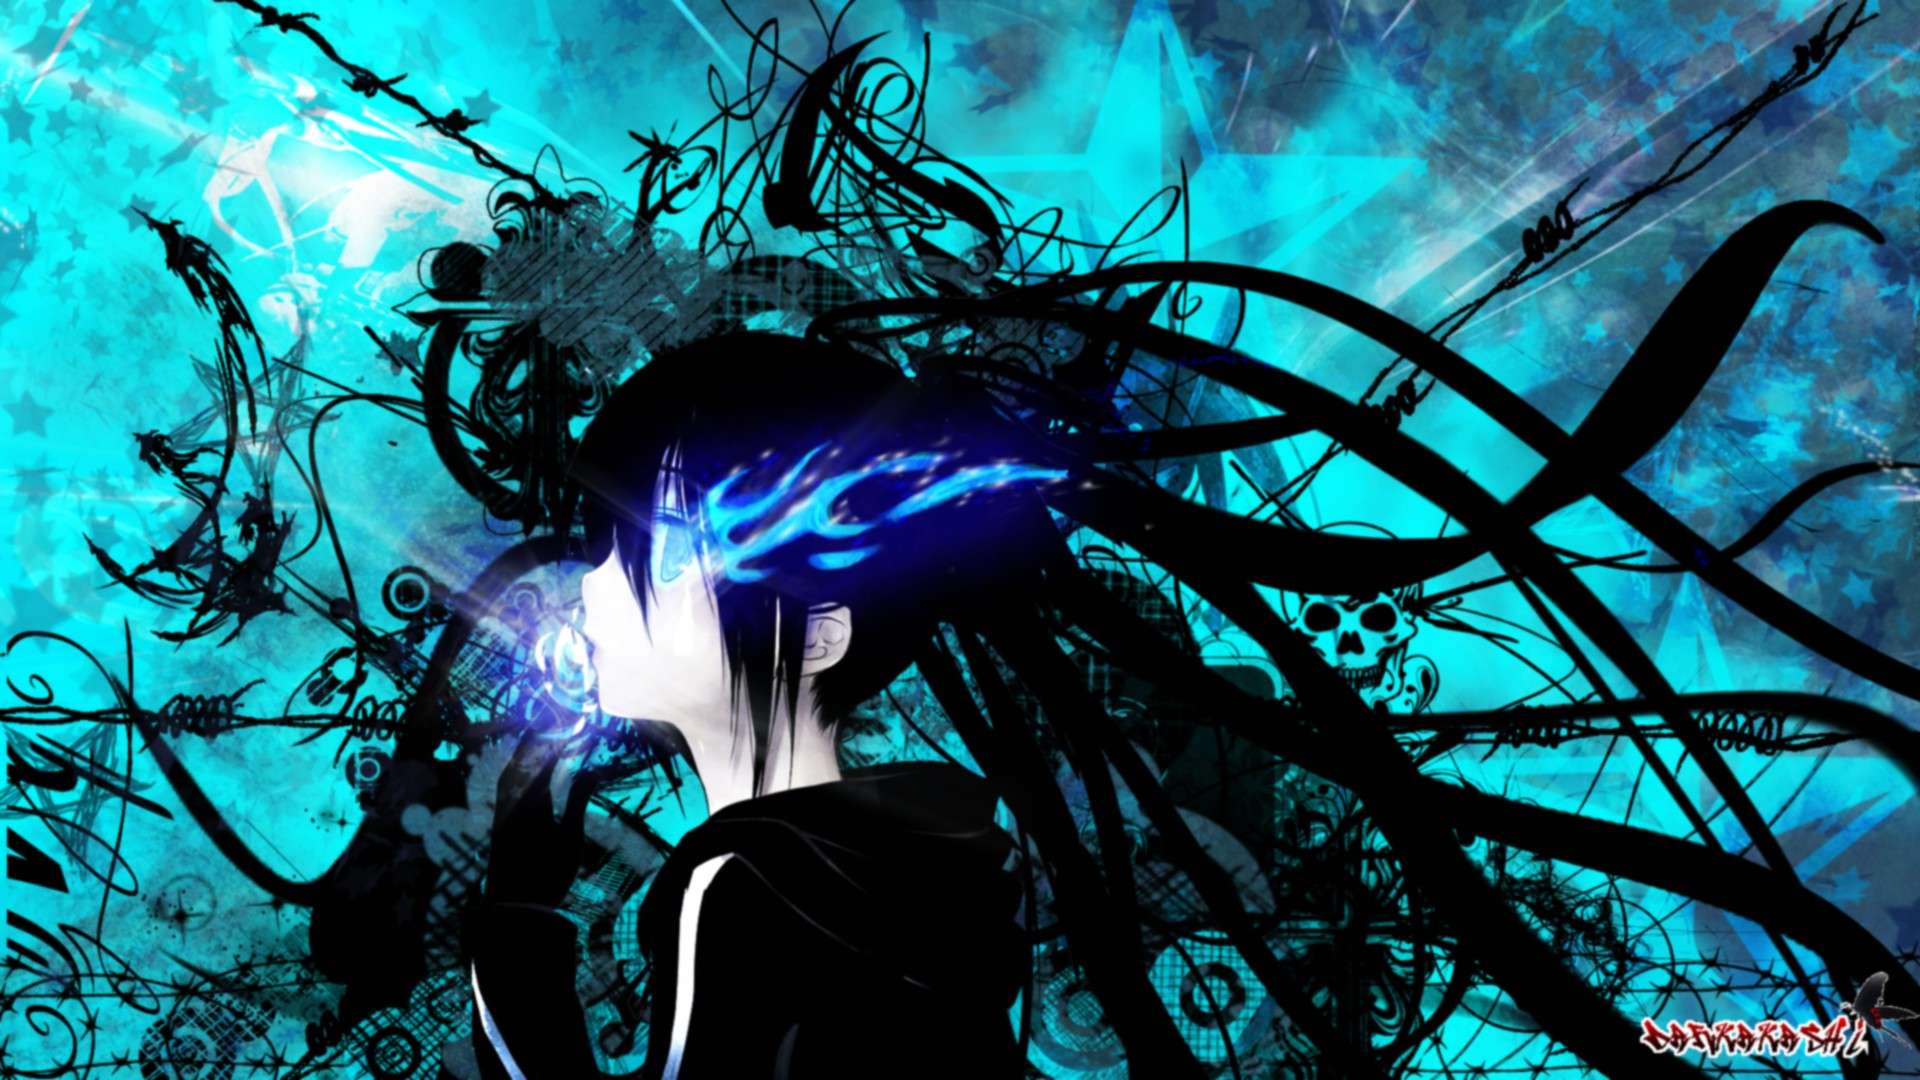 Image About Black Rock Shooter